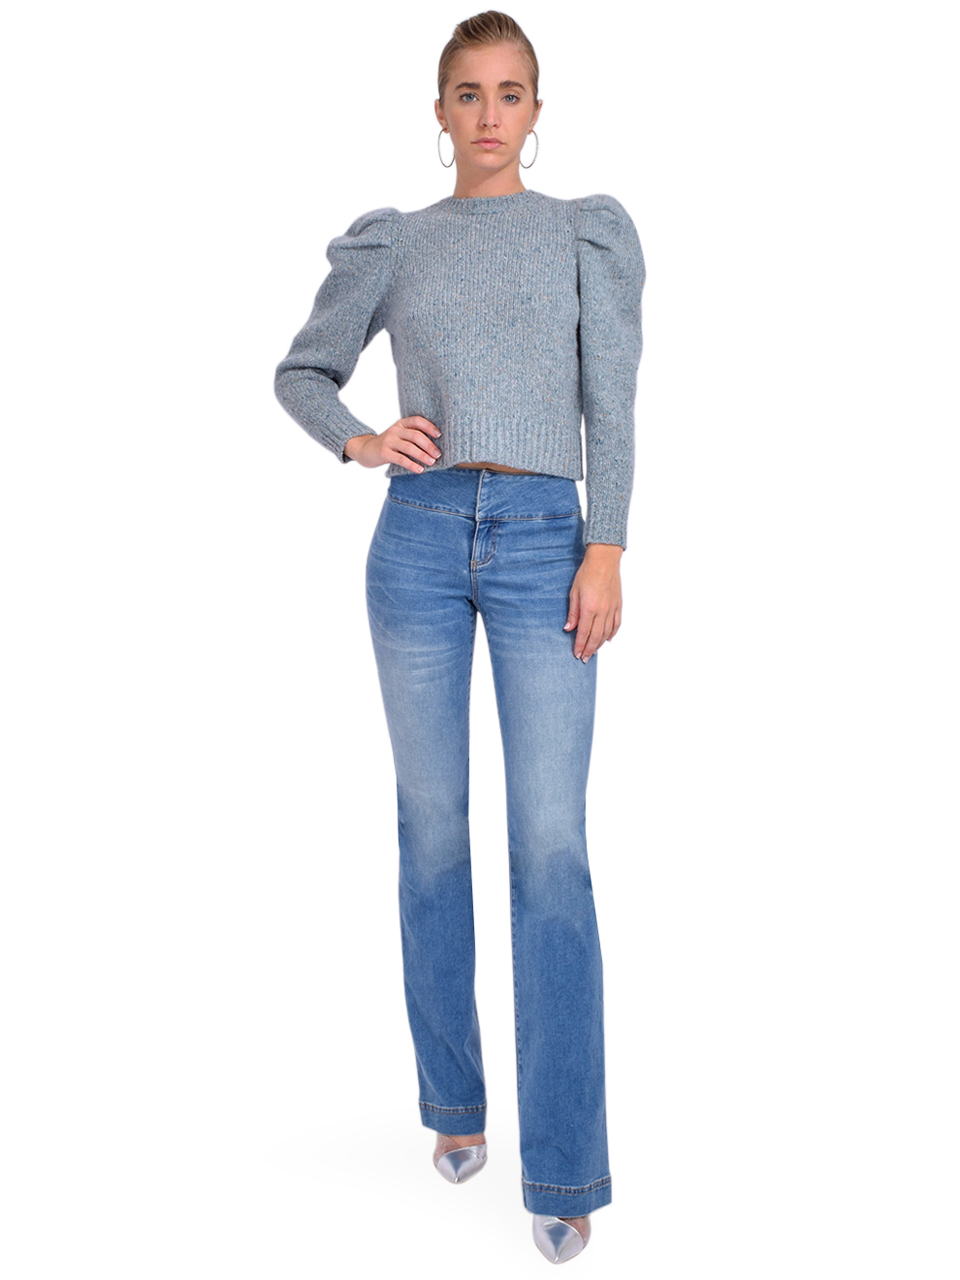 FRAME Pleated Sleeve Sweater in Chambray Blue Full Outfit 

